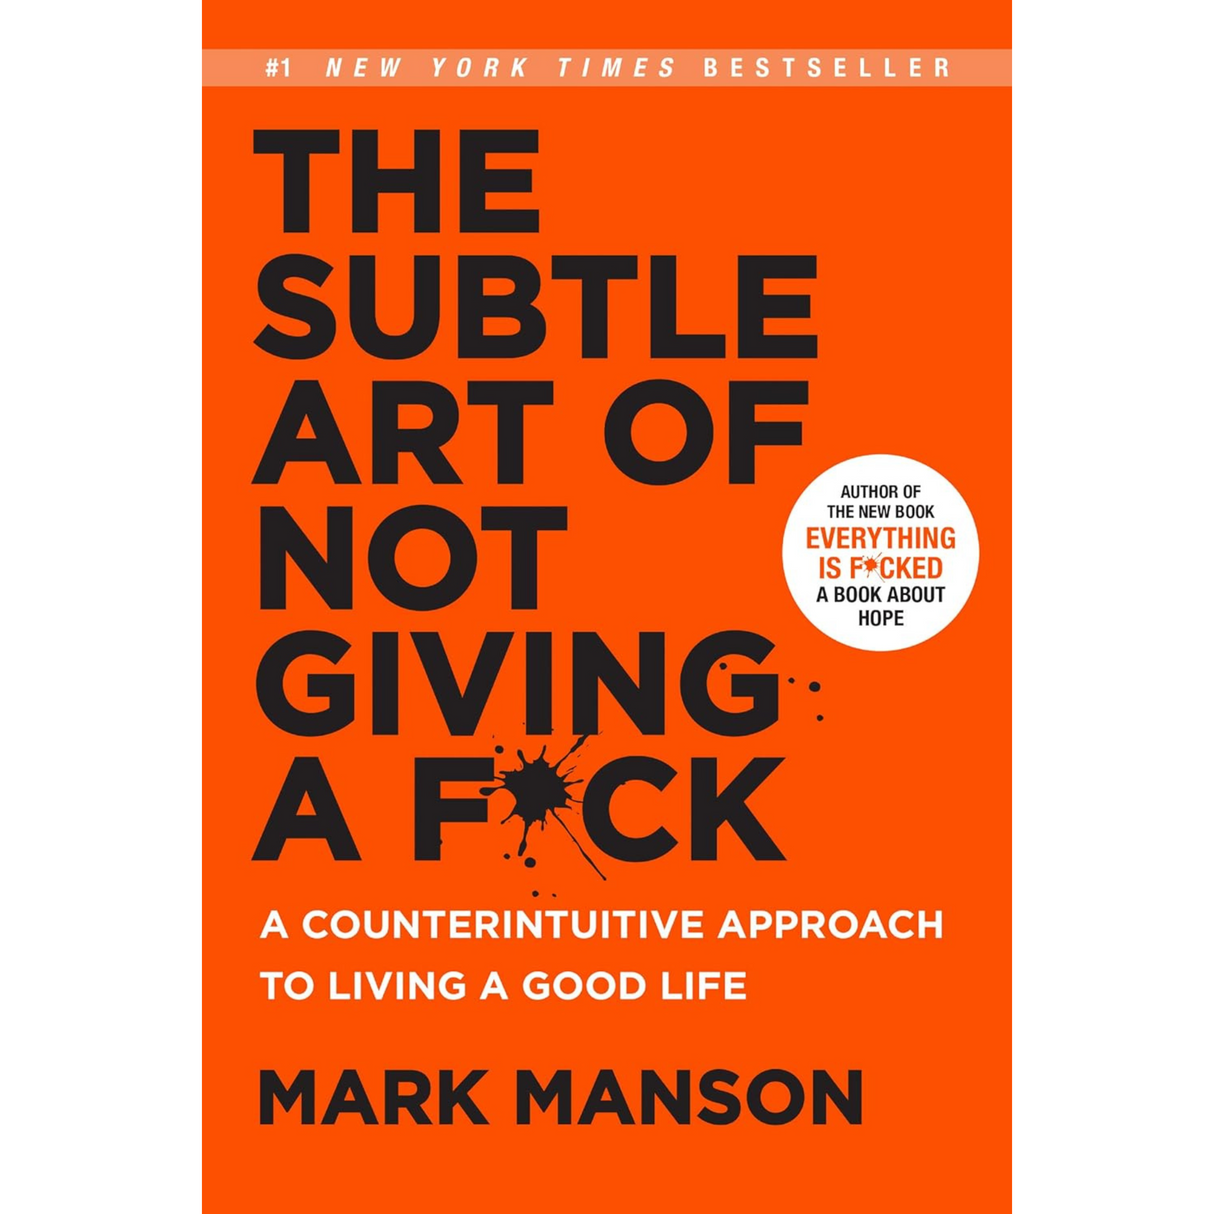 THE SUBTLE ART OF NOT GIVING A F*CK Hardcover – 17 Nov. 2016